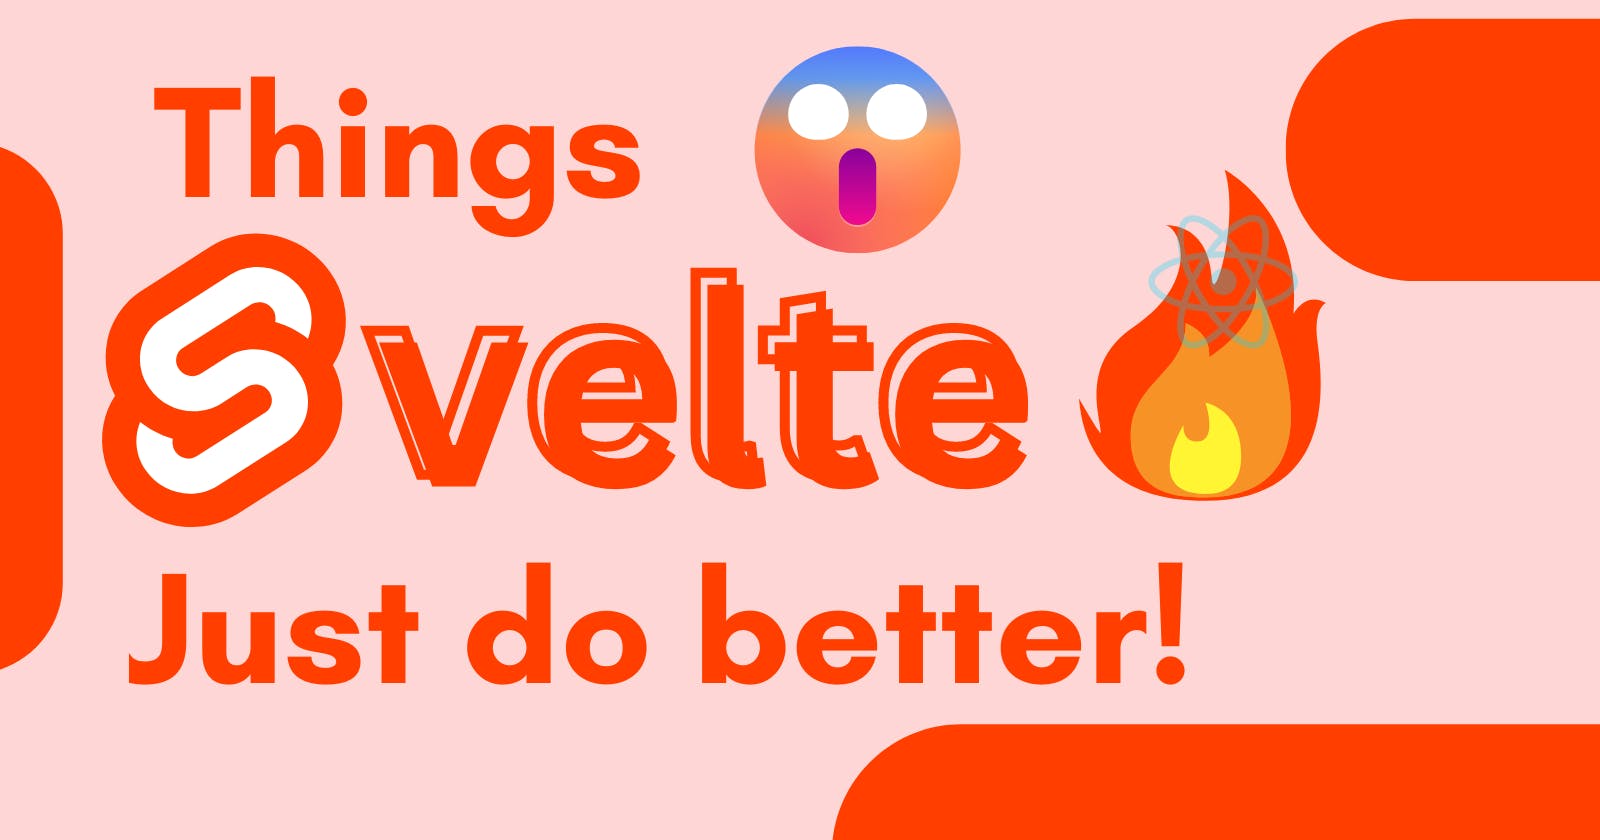 Things Svelte just do better!